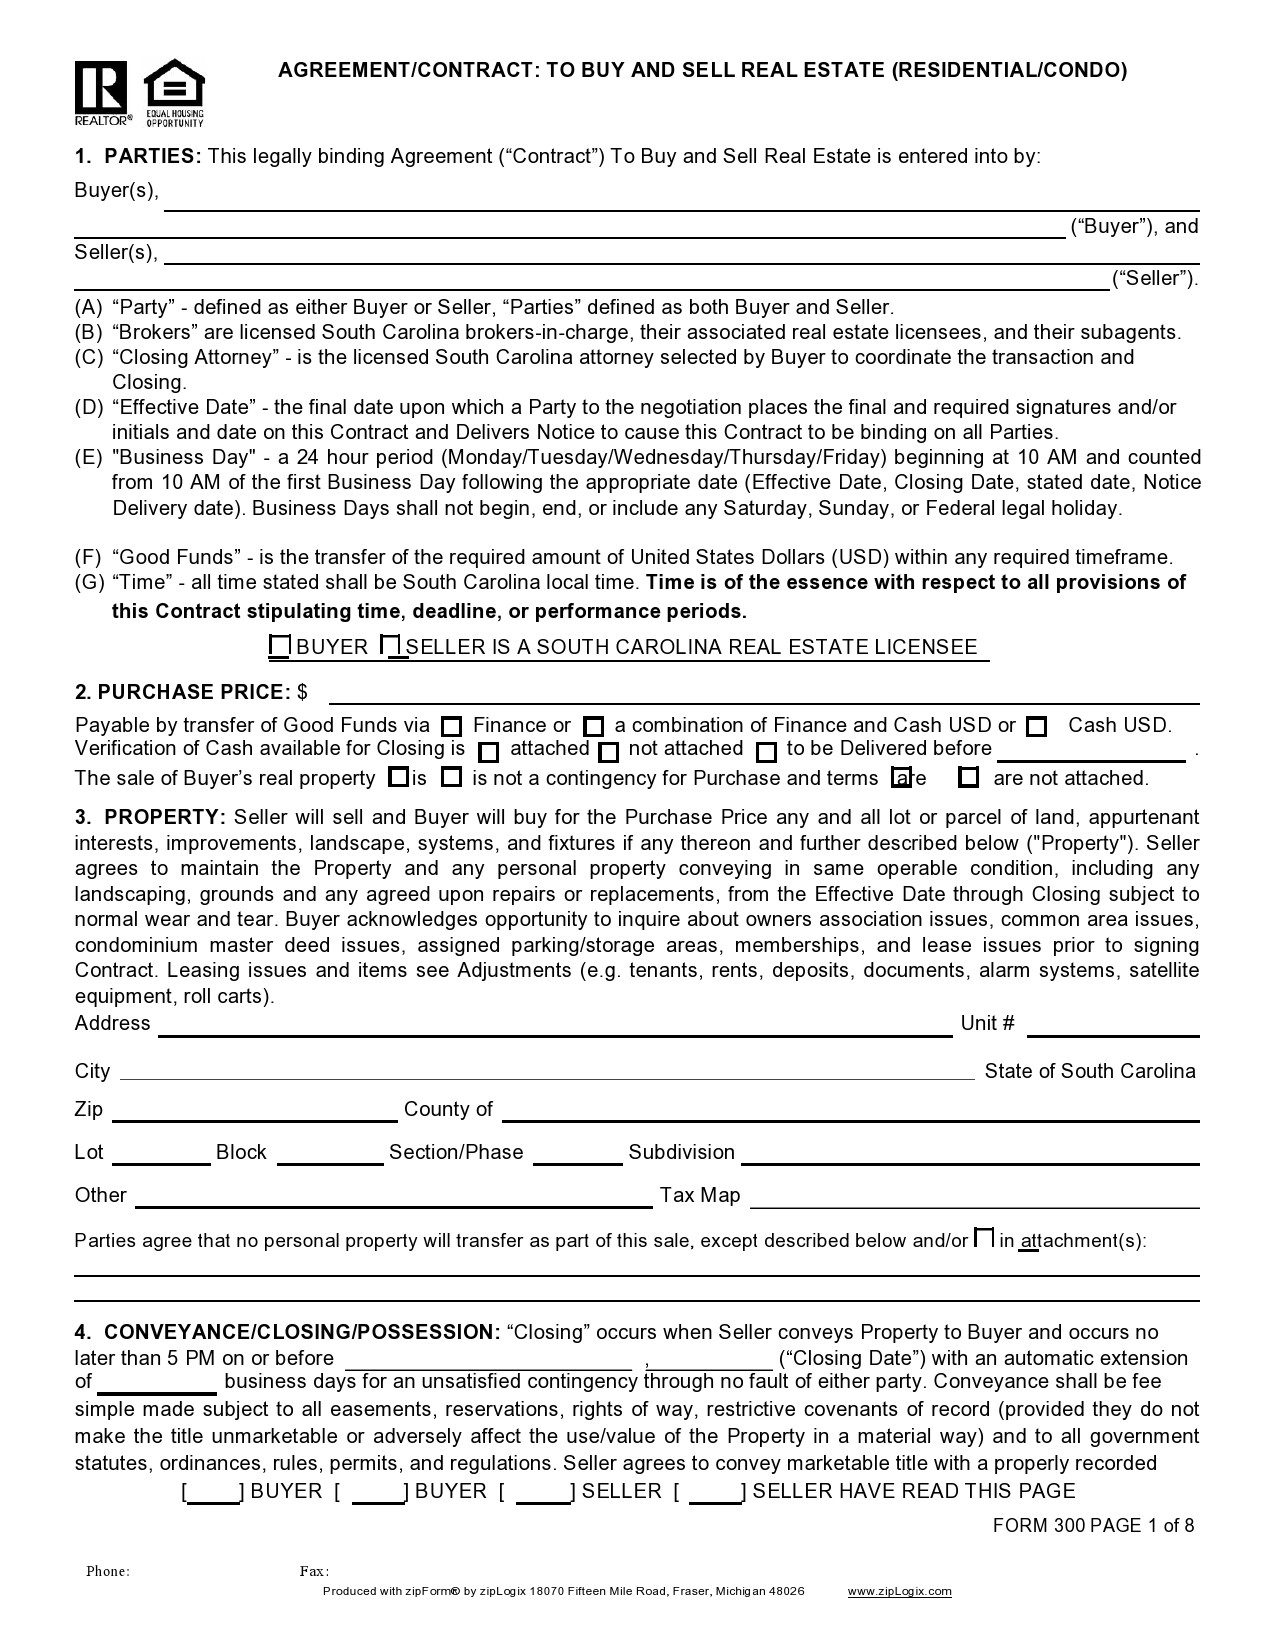 Free land contract form 46